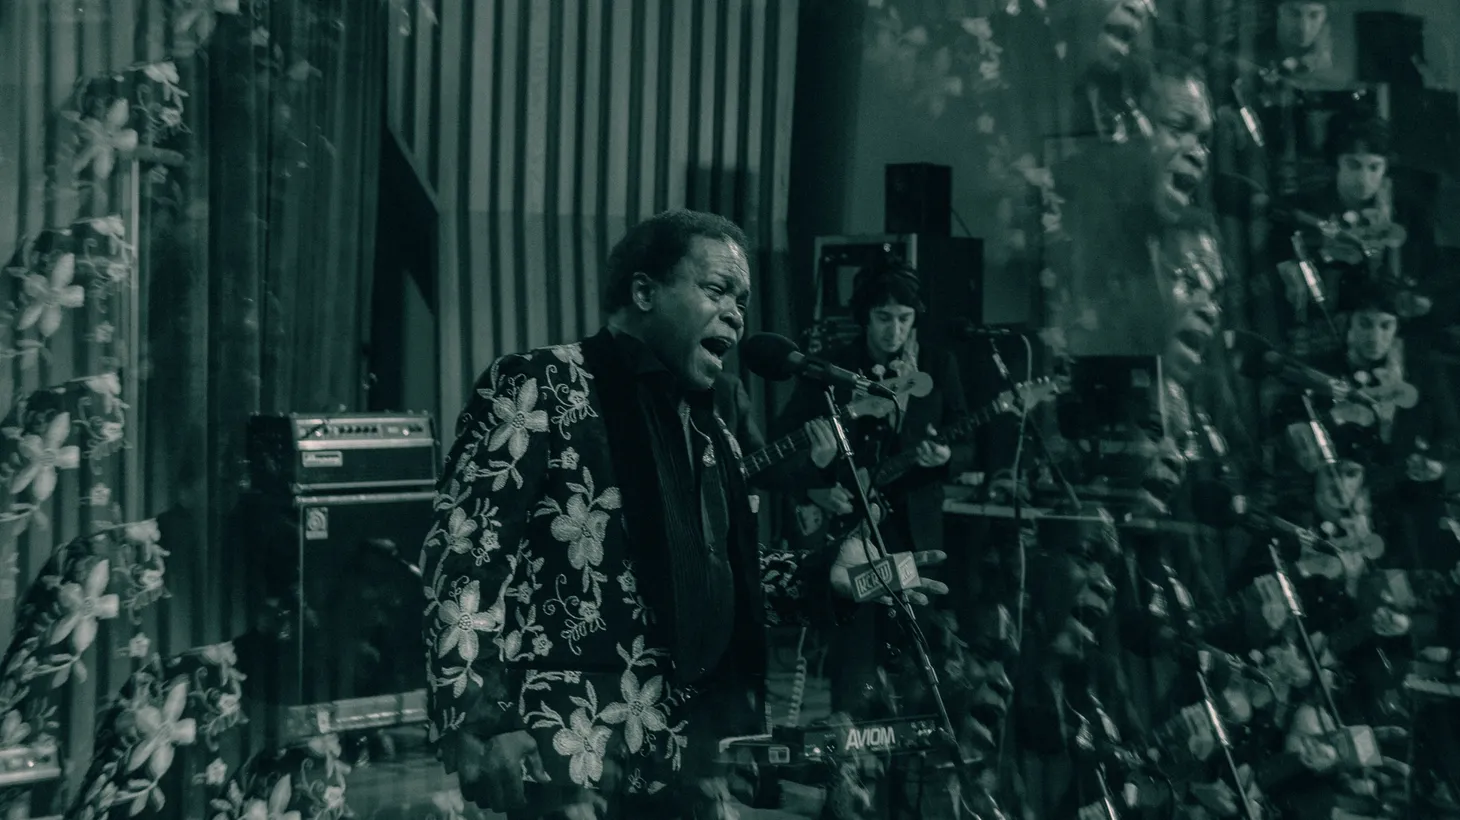 Lee Fields performs with a seven-piece band at KCRW.